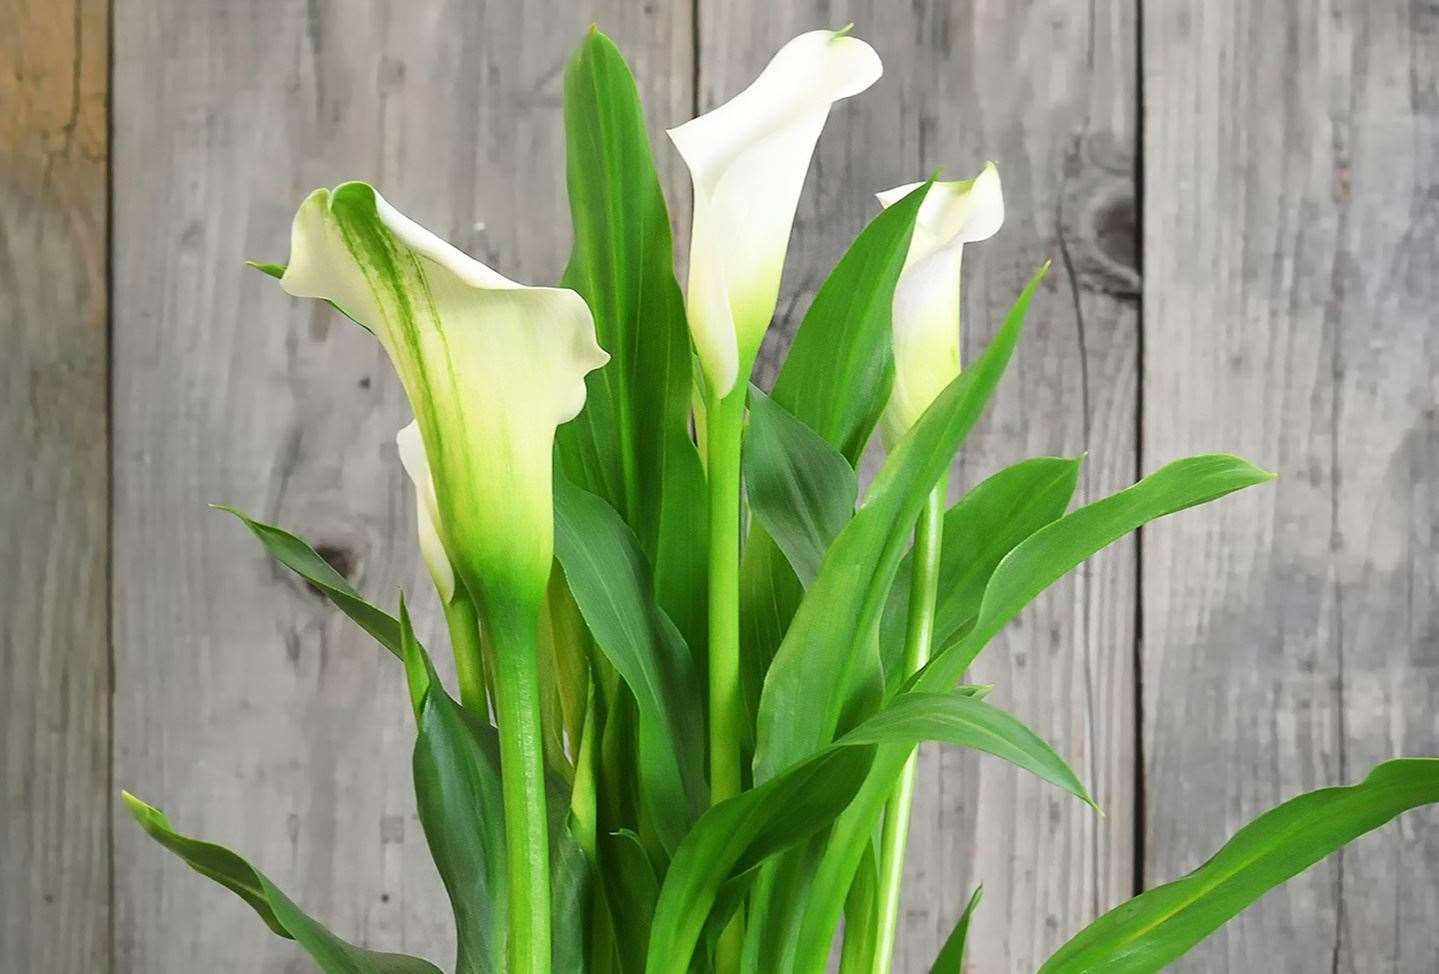 Lily plants can prove harmful. Image: Stock photo